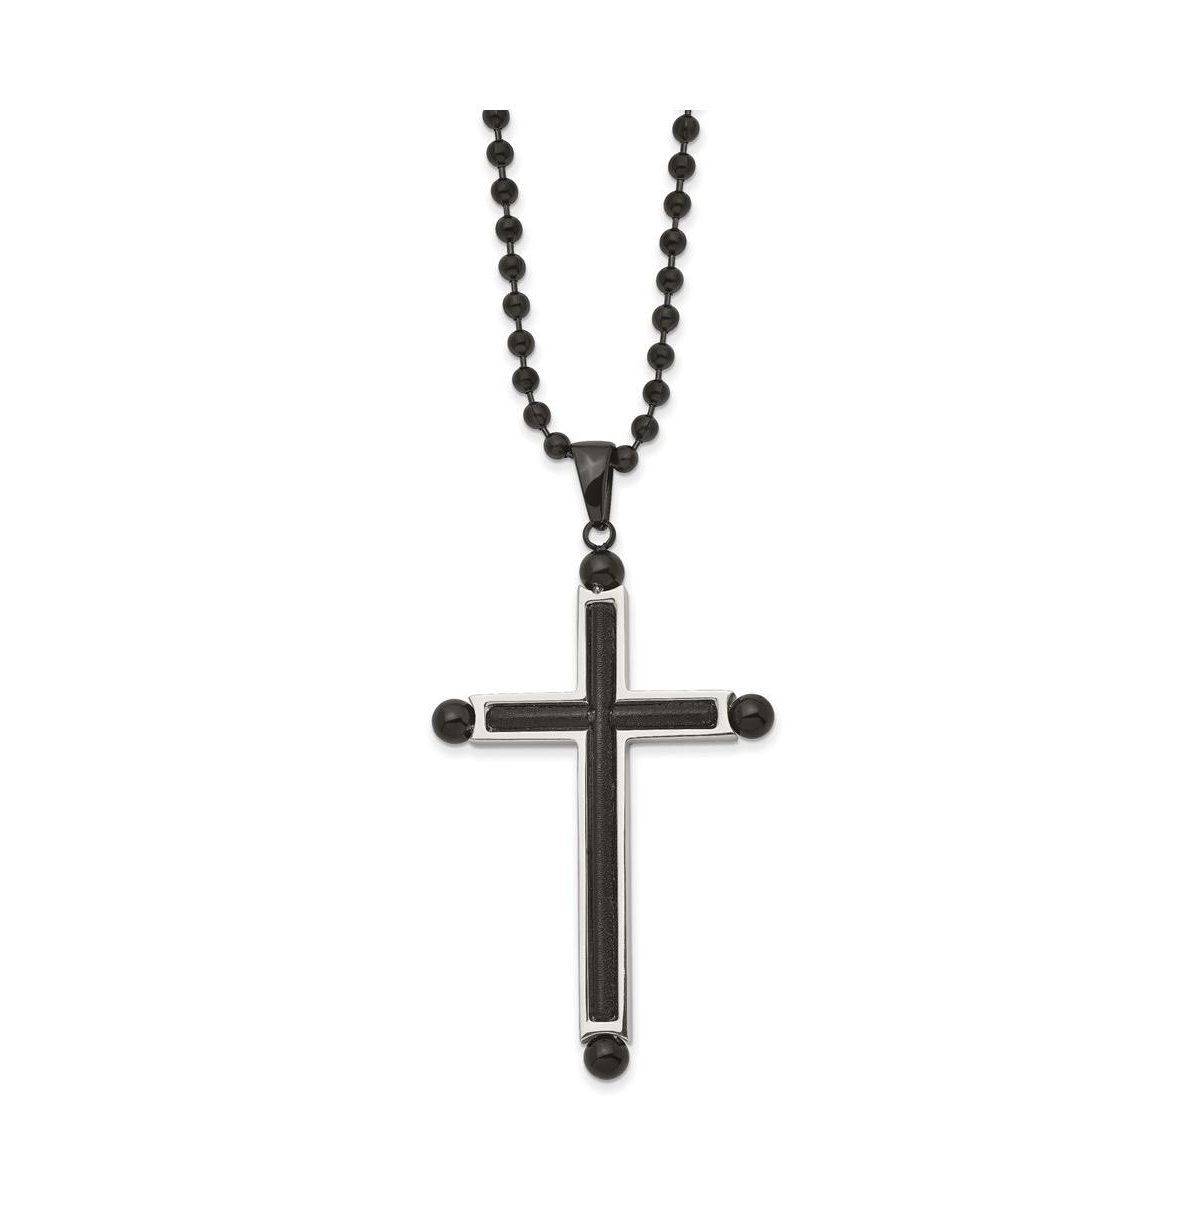 Polished Black Ip-plated Cross Pendant on a Ball Chain Necklace - Black